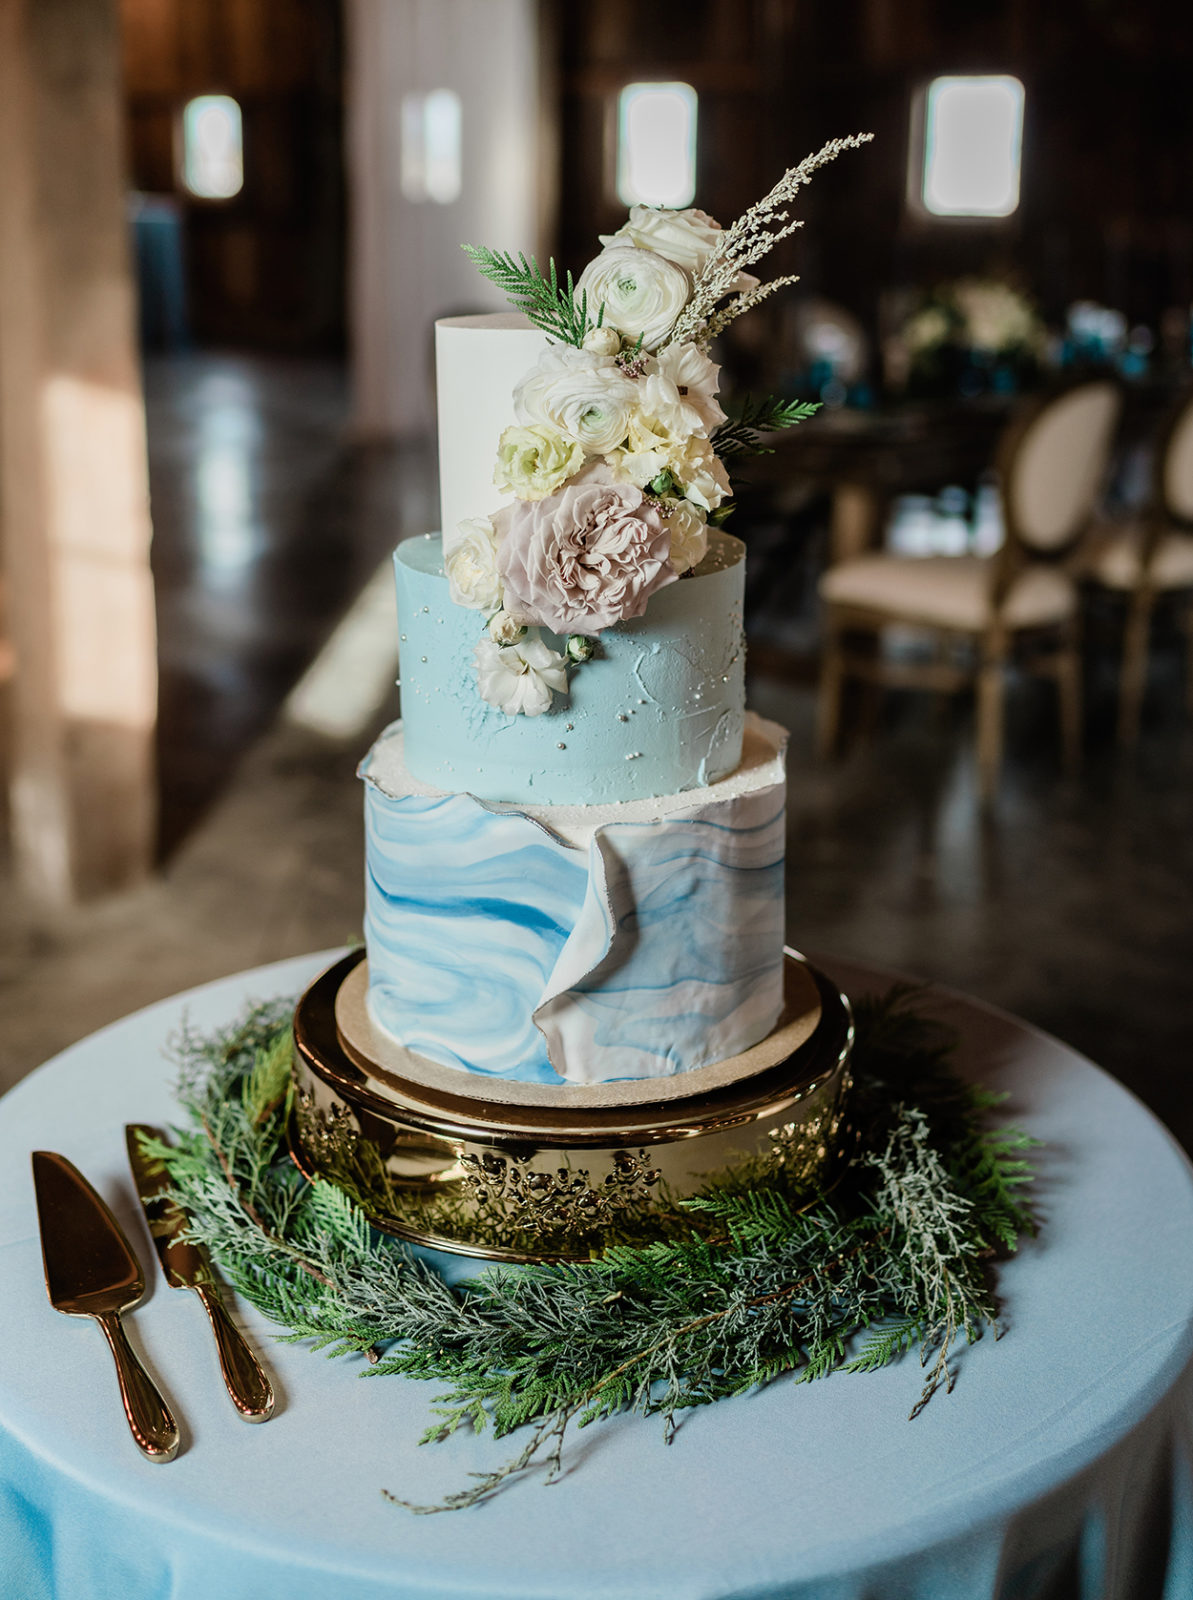 Blue marbled cake with floral details for a romantic wedding